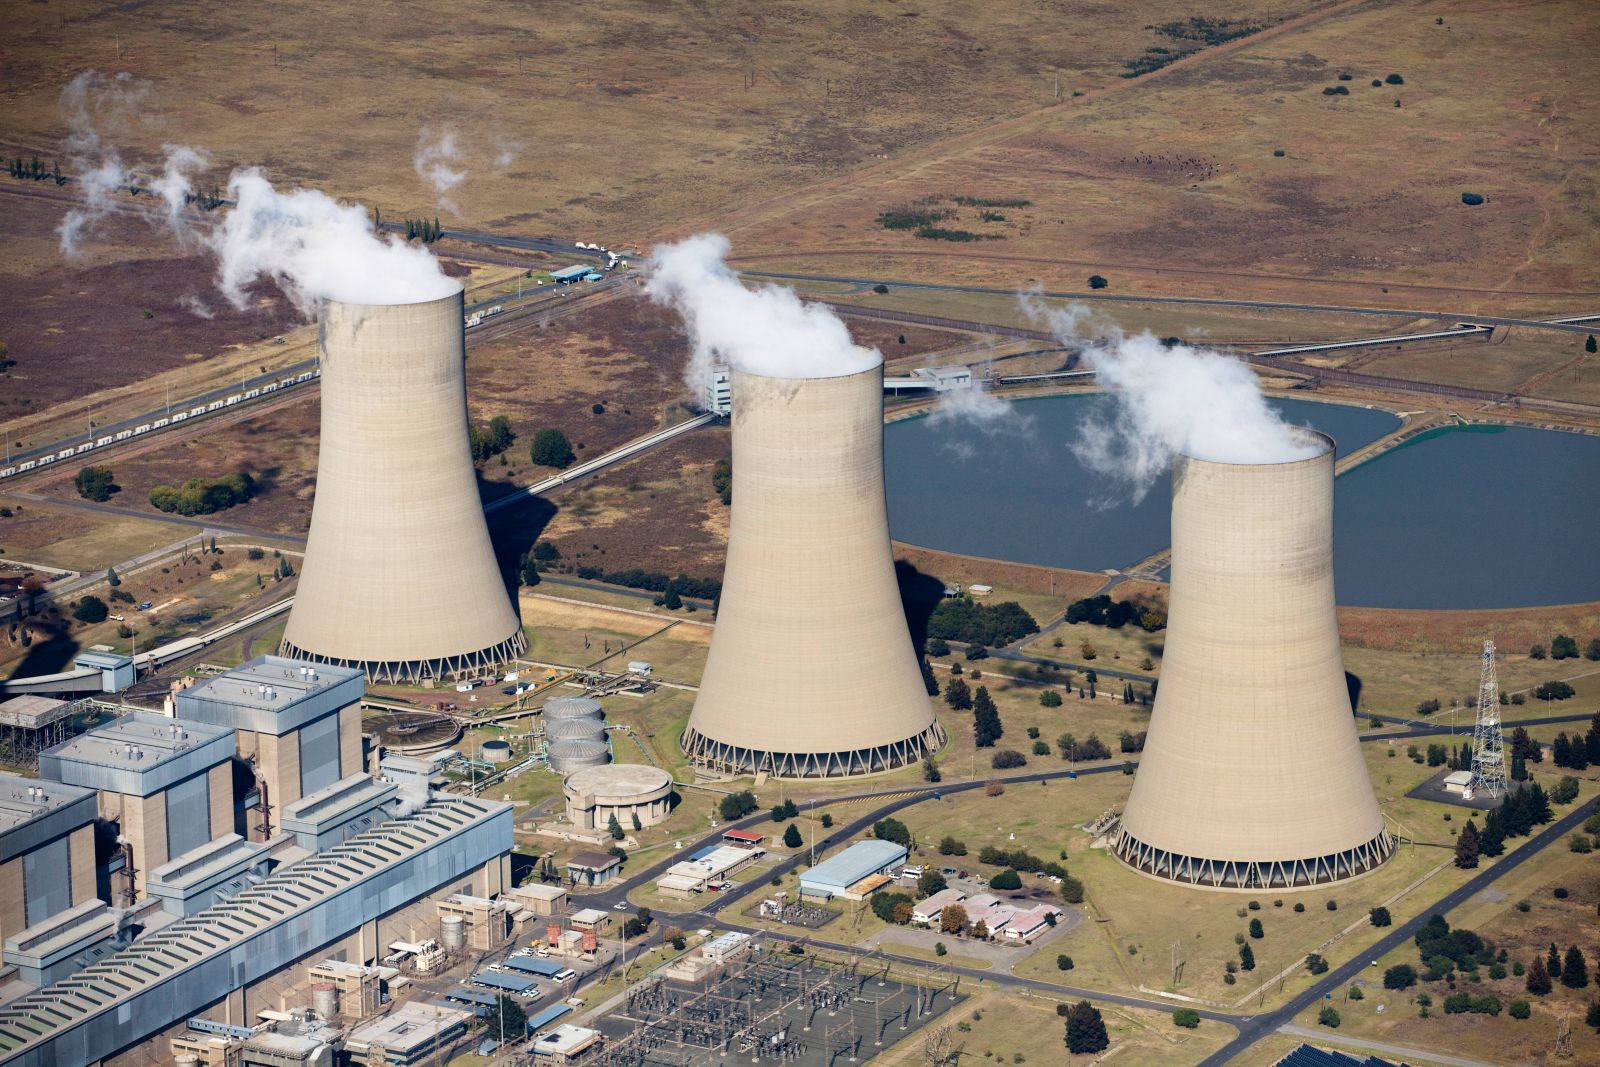 Carbon intensive power plant: coal-fired electrical plant Lethabo Power Station in South Africa.